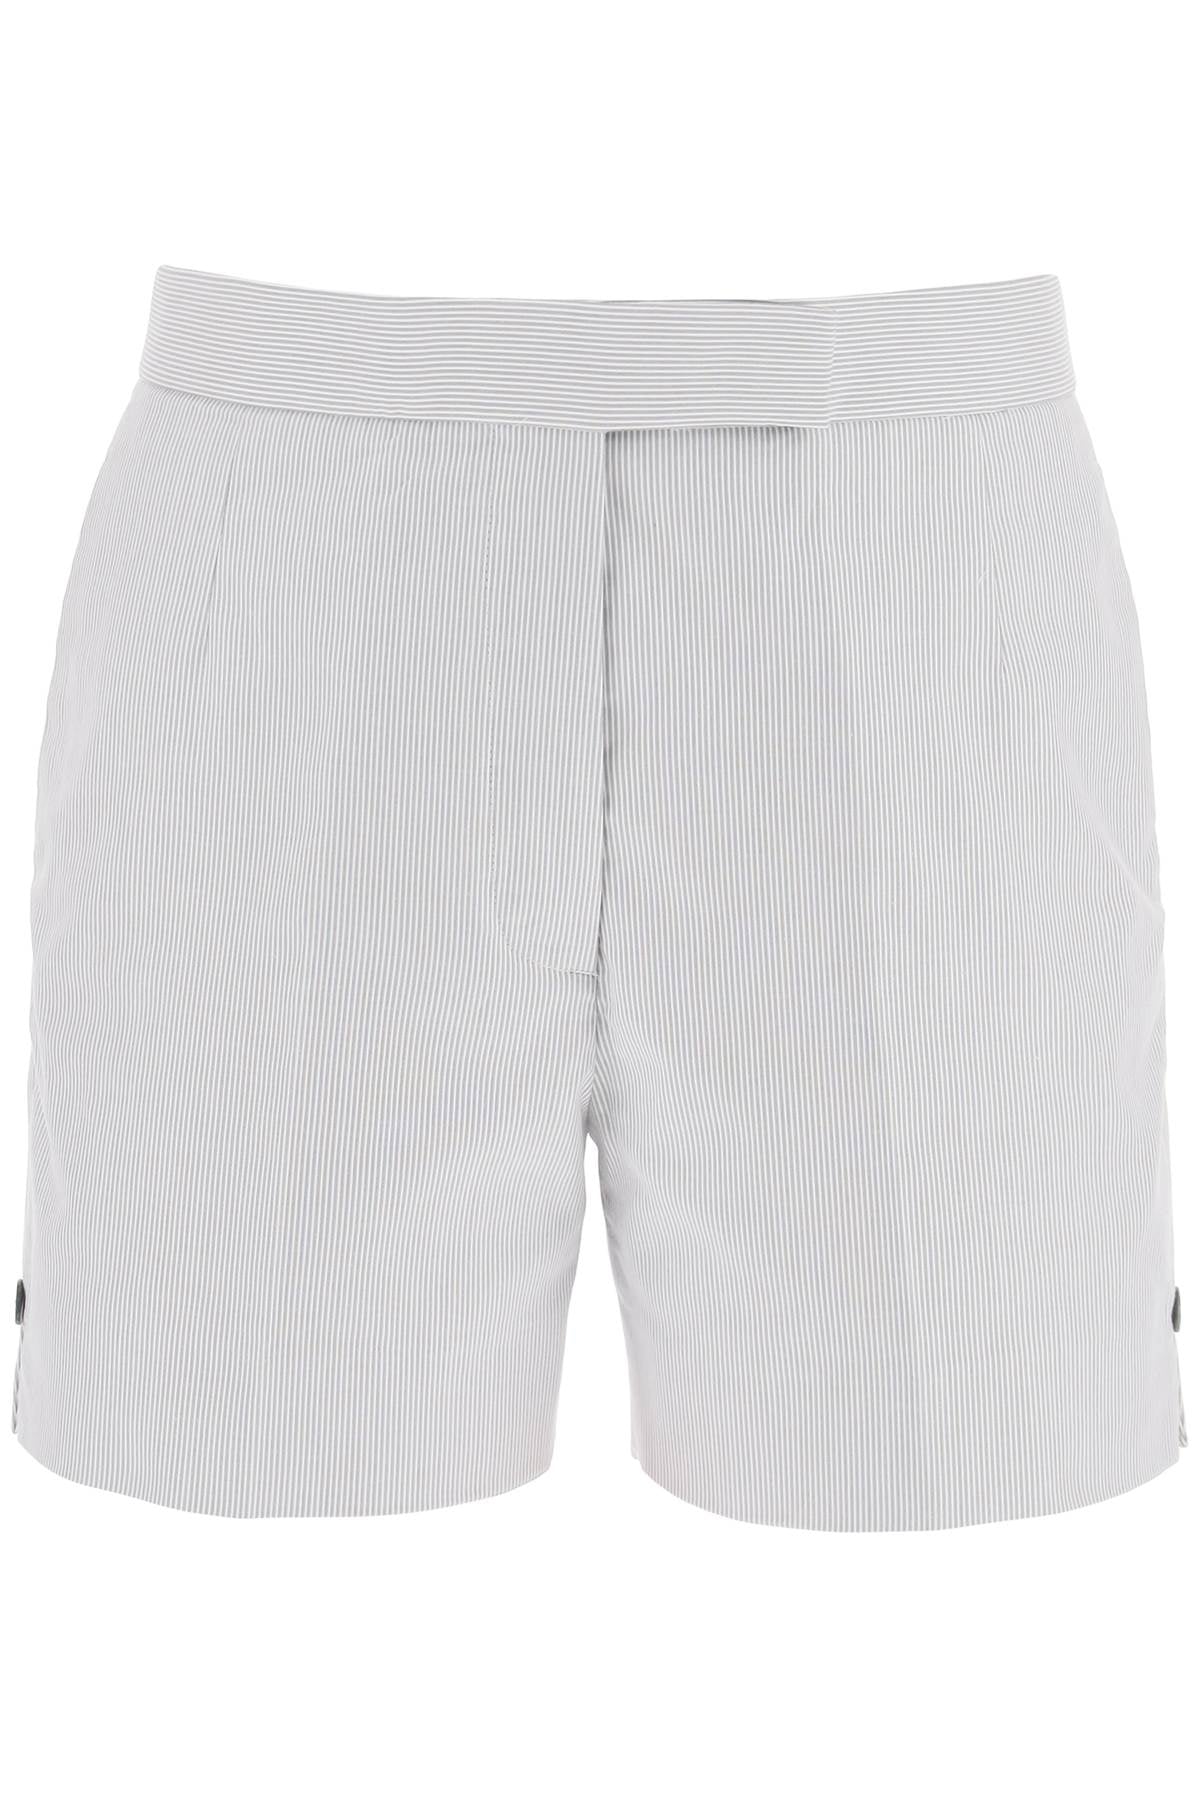 Thom browne shorts with pincord motif-0